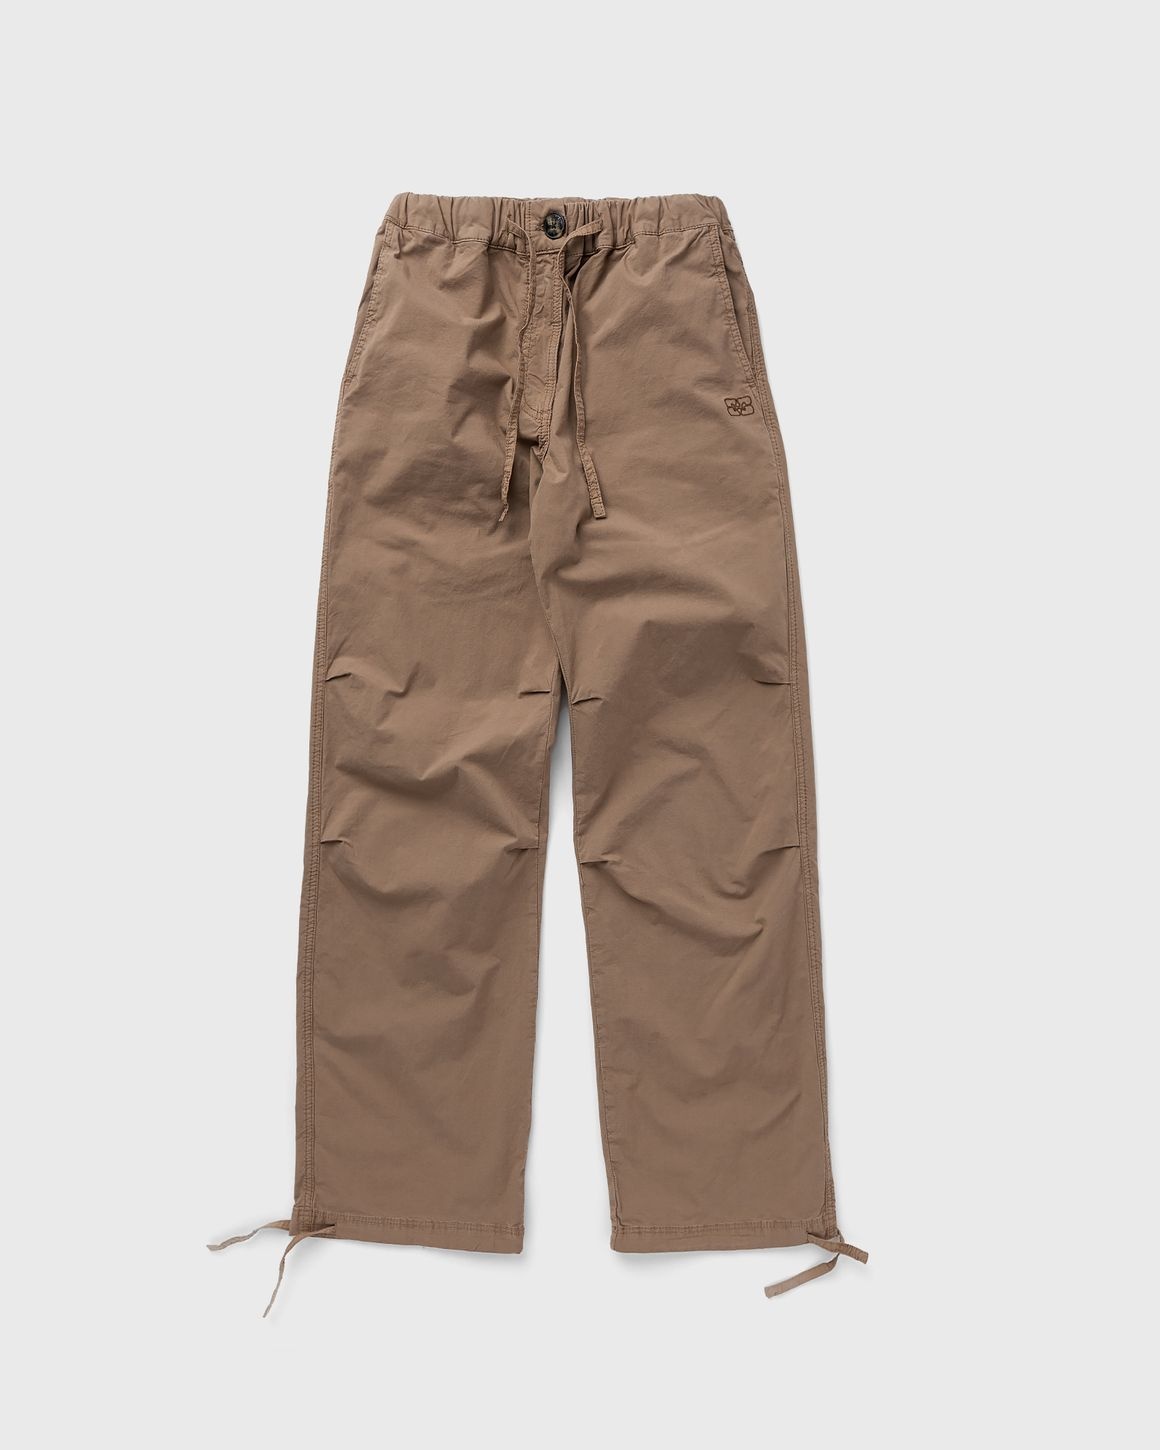 Washed Cotton Canvas Draw String Pants - 1